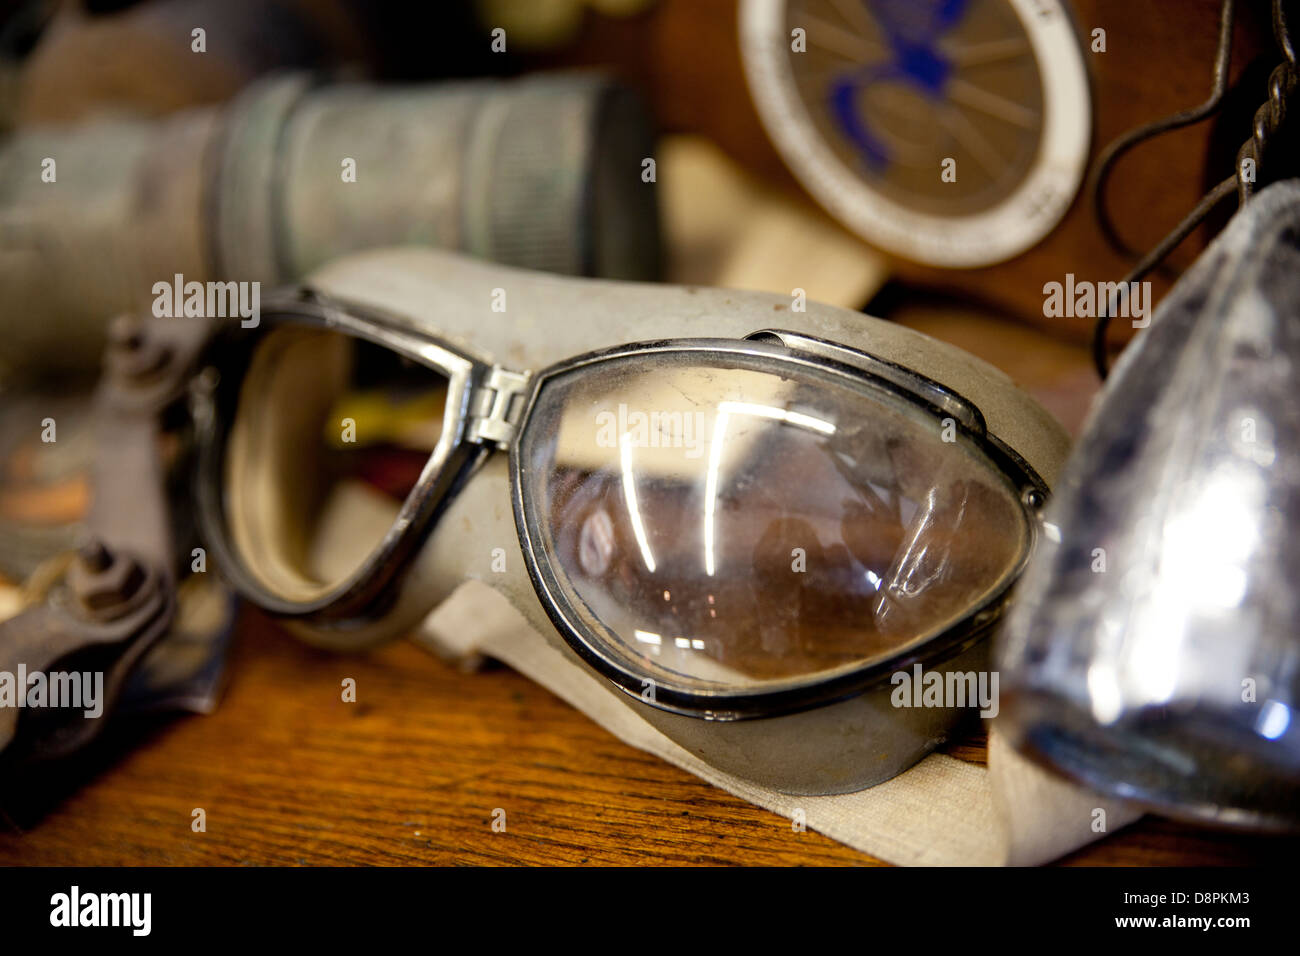 Close up horizontal photograph of old motorcycle goggles Stock Photo